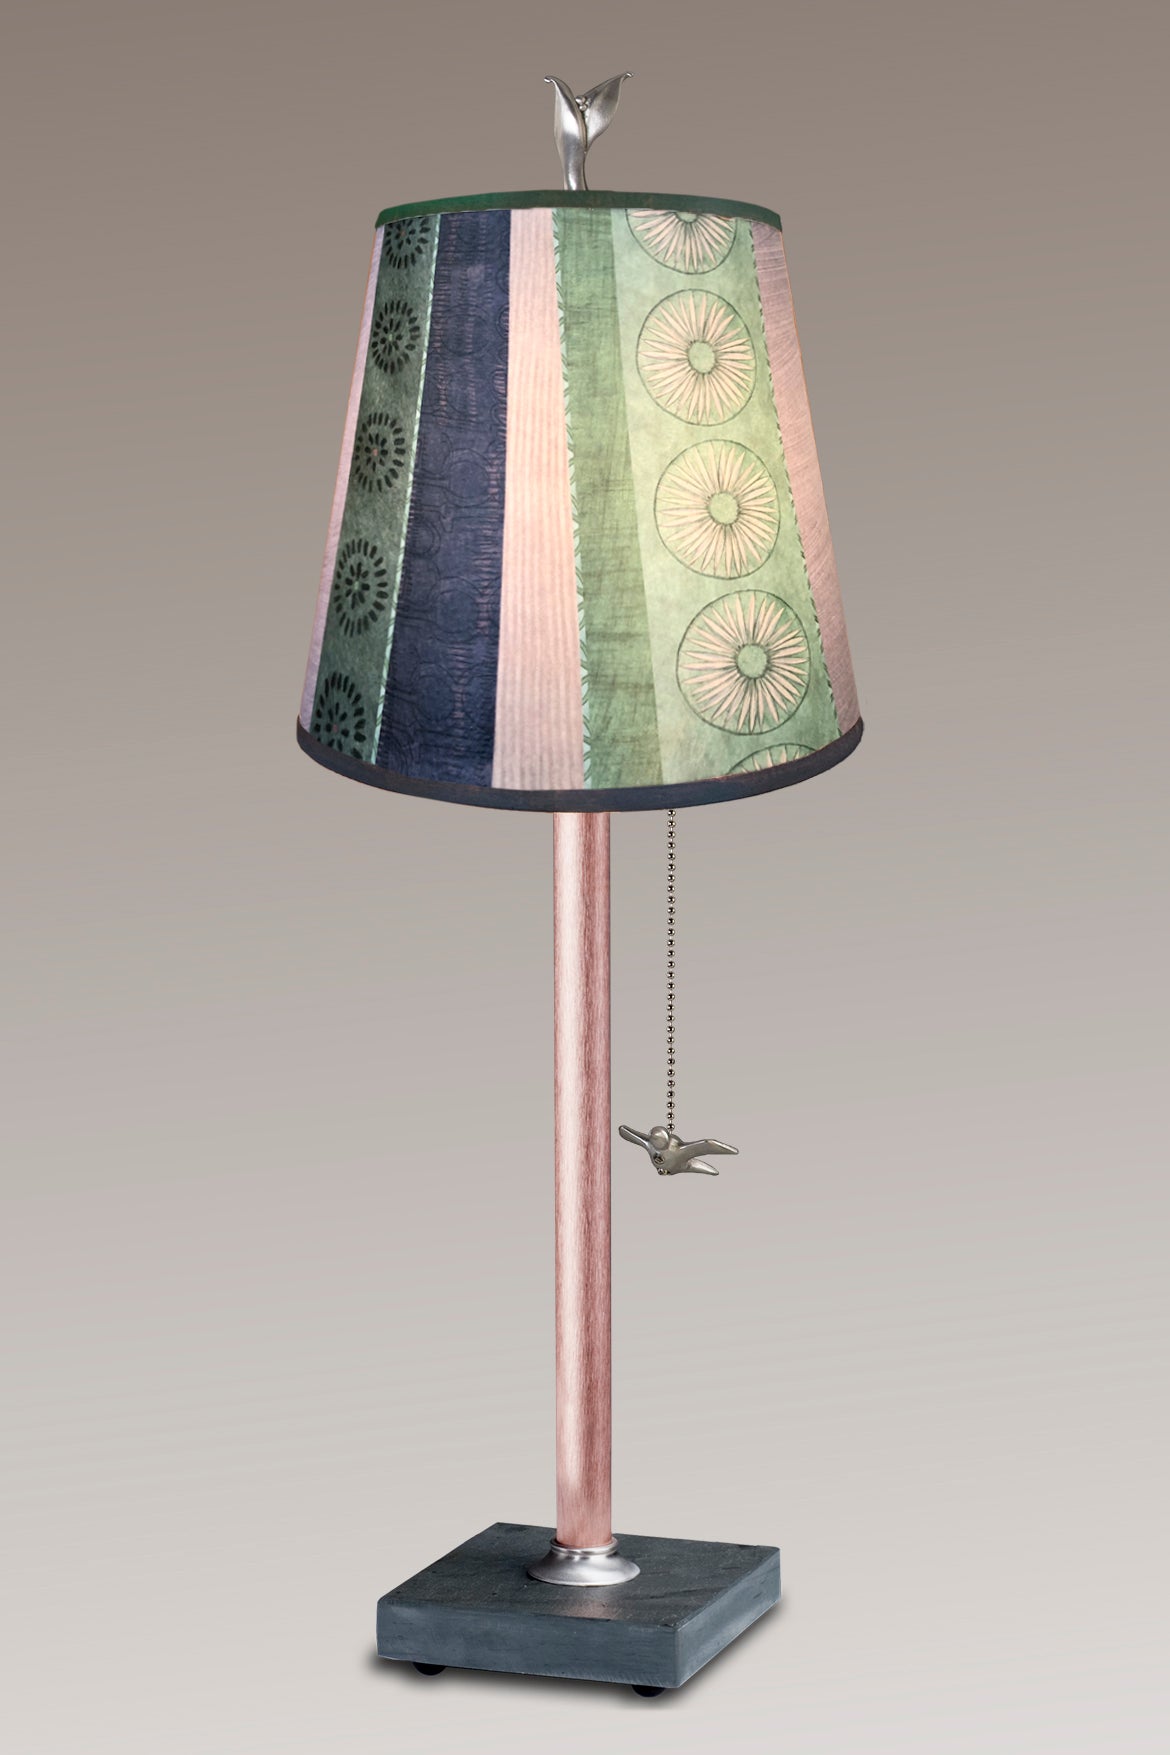 Janna Ugone & Co Table Lamps Copper Table Lamp with Small Drum Shade in Serape Waters